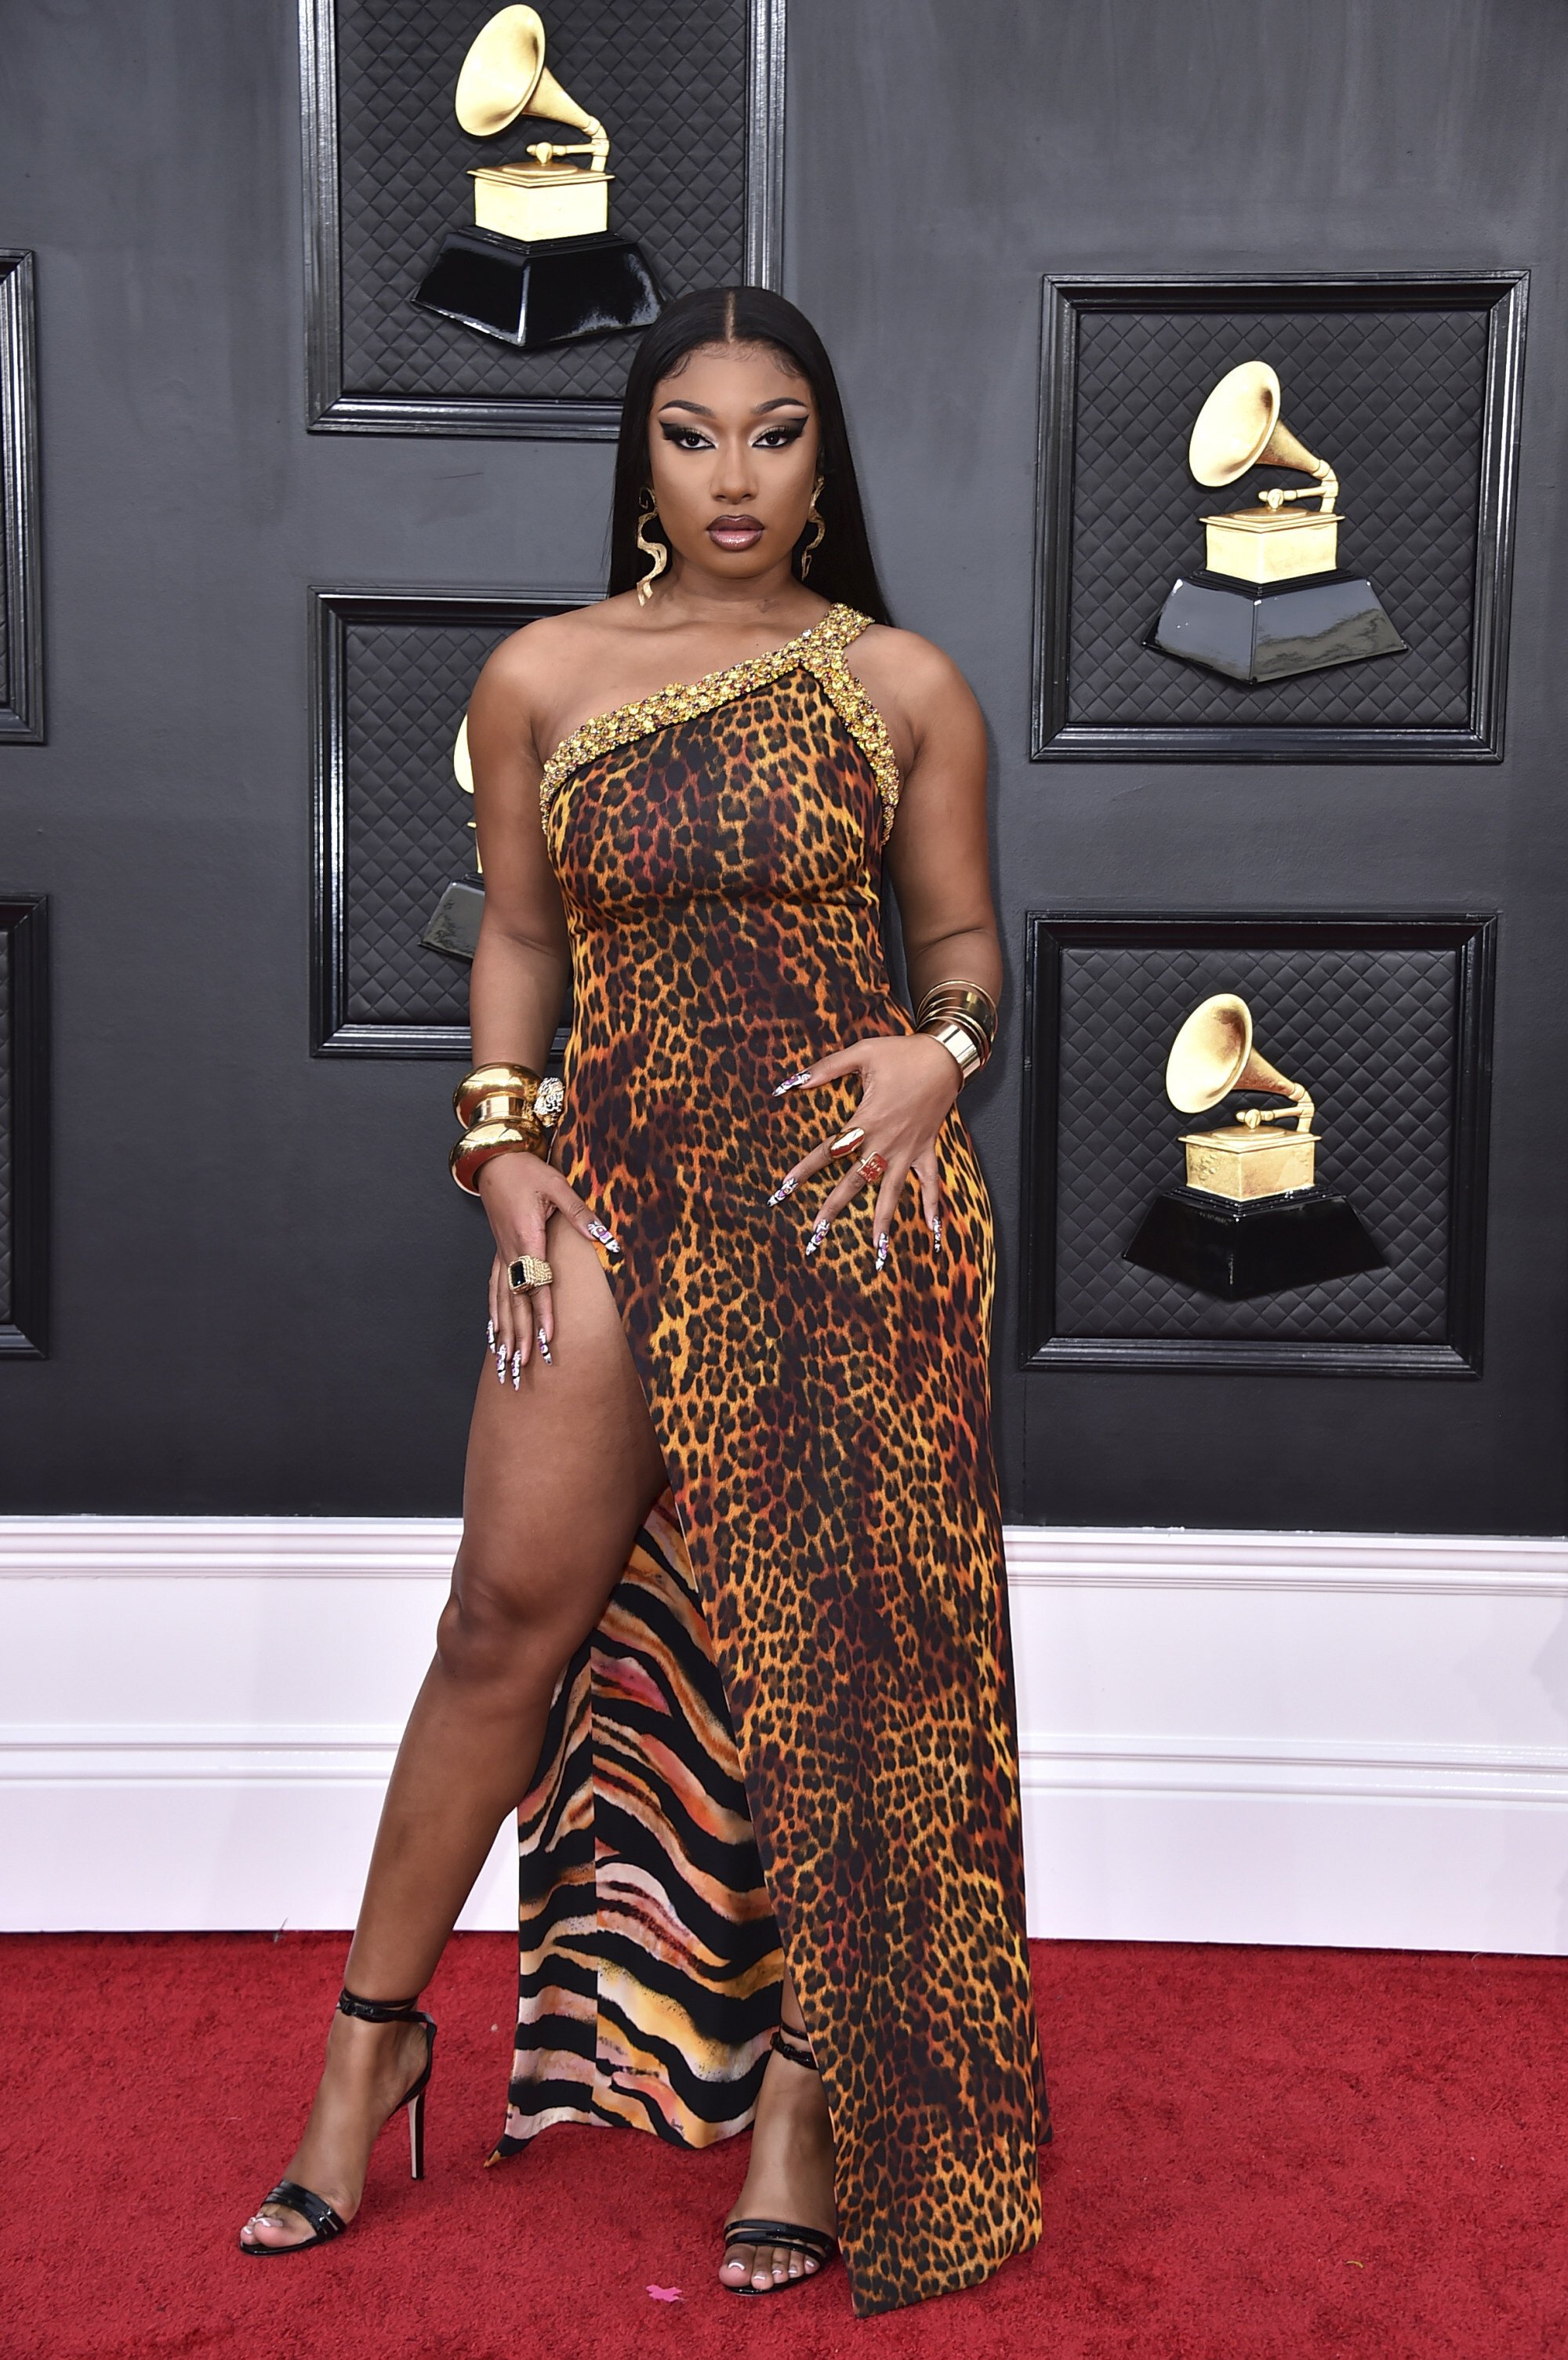 Megan Thee Stallion embodied fierce at this year’s awards – but we still prefer her Oscars gown. Photo: AP